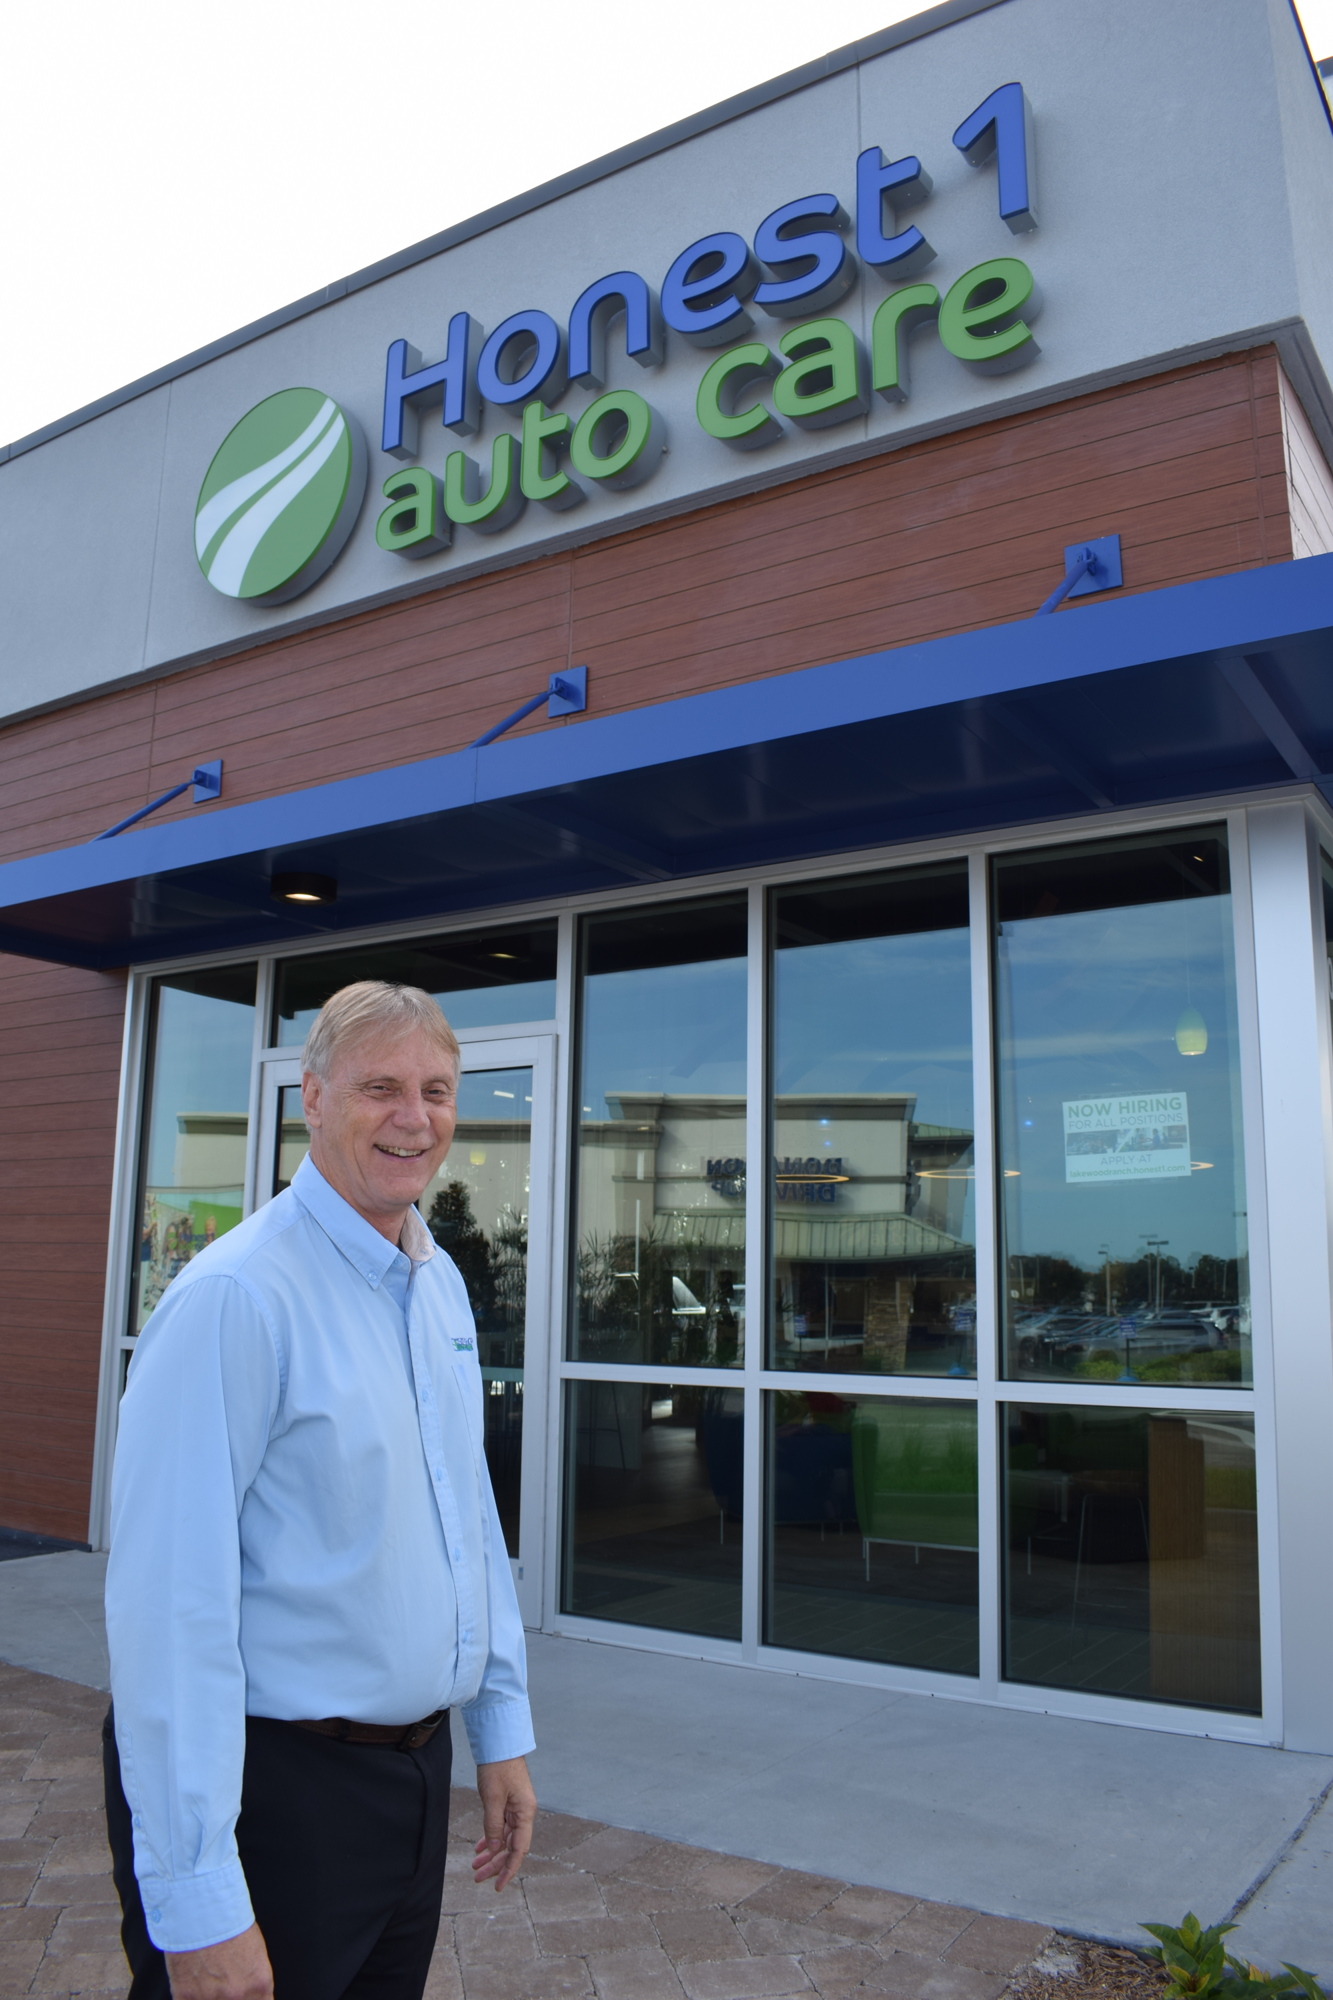 Eric Sewell, the vice president of operations for Honest1 Auto Care, said the building design fits with other local retail businesses.